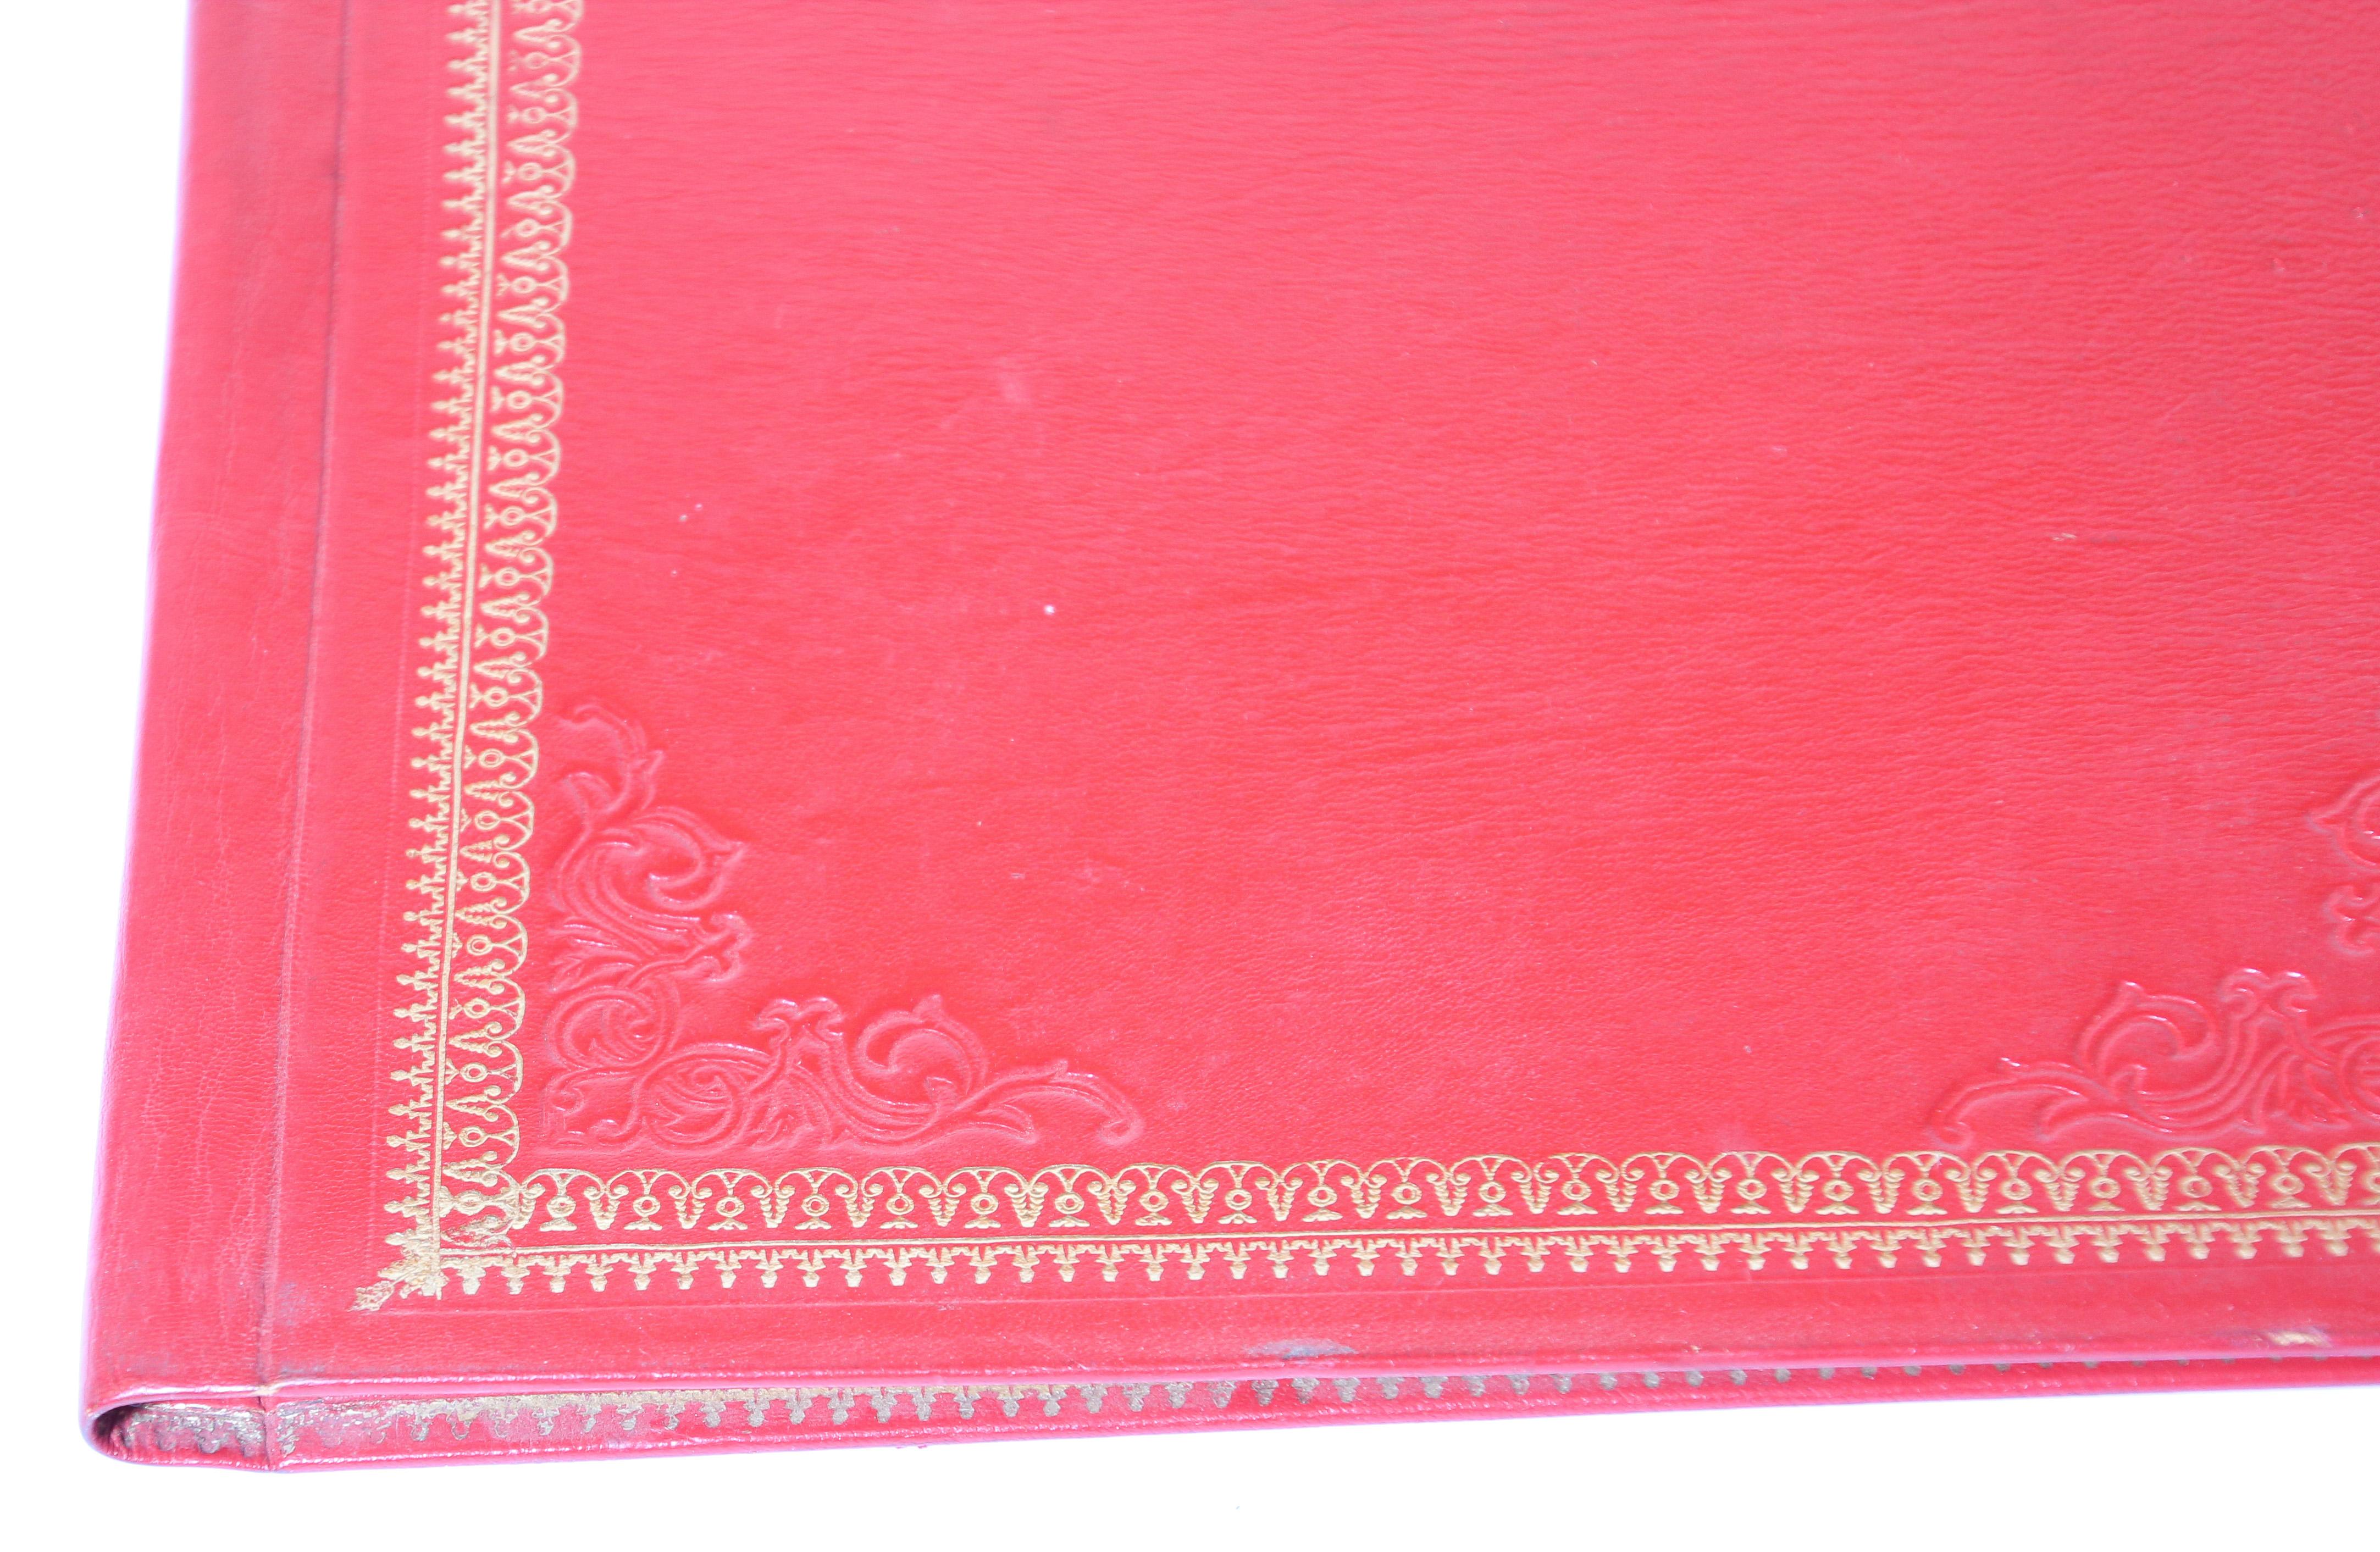 Mid-Century Modern Vintage Moroccan Embossed Leather Padfolio For Sale